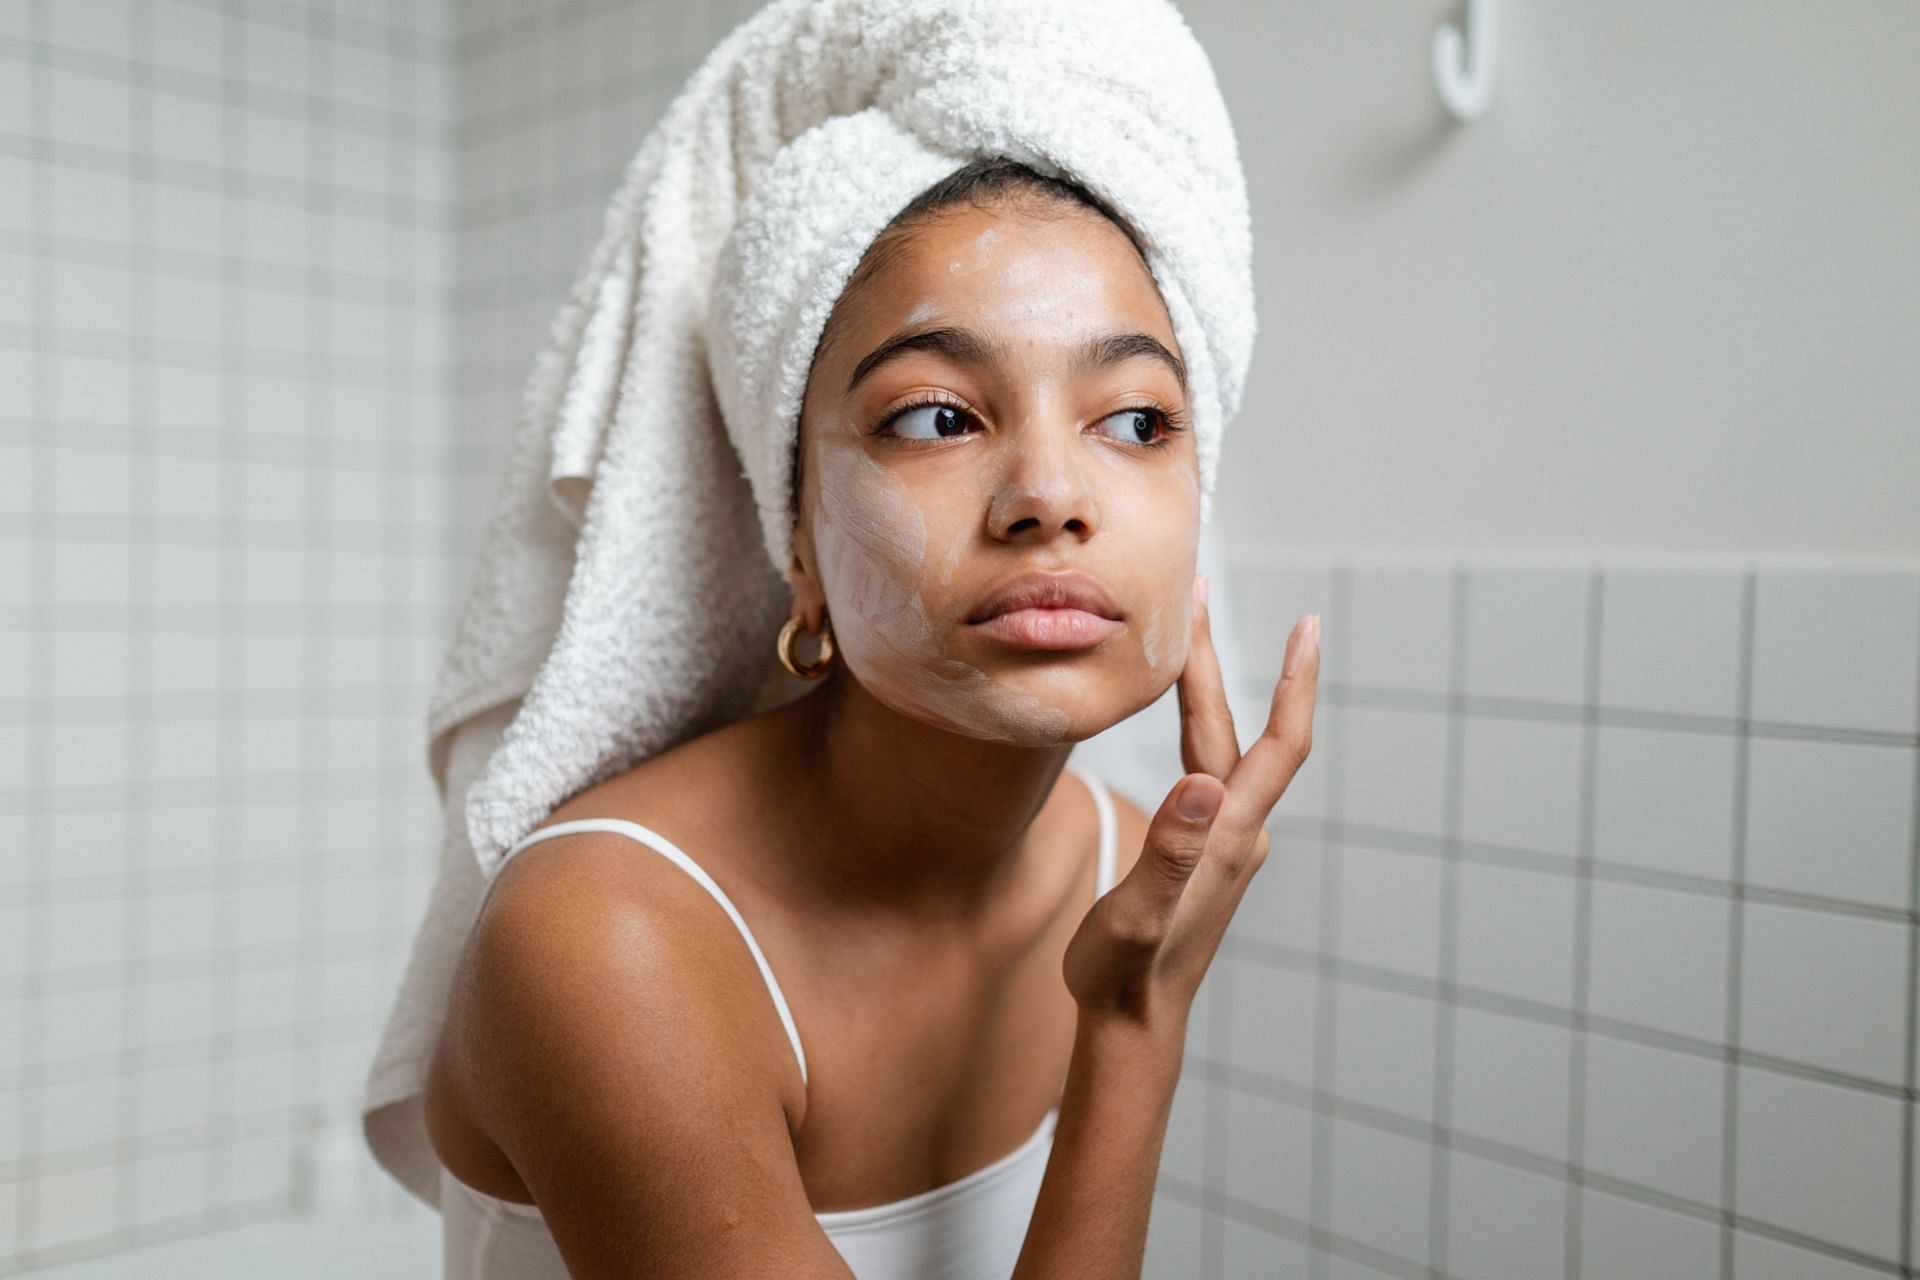 Every skin type should use a moisturizer every day. (Image via Pexels/ Ron Lach)